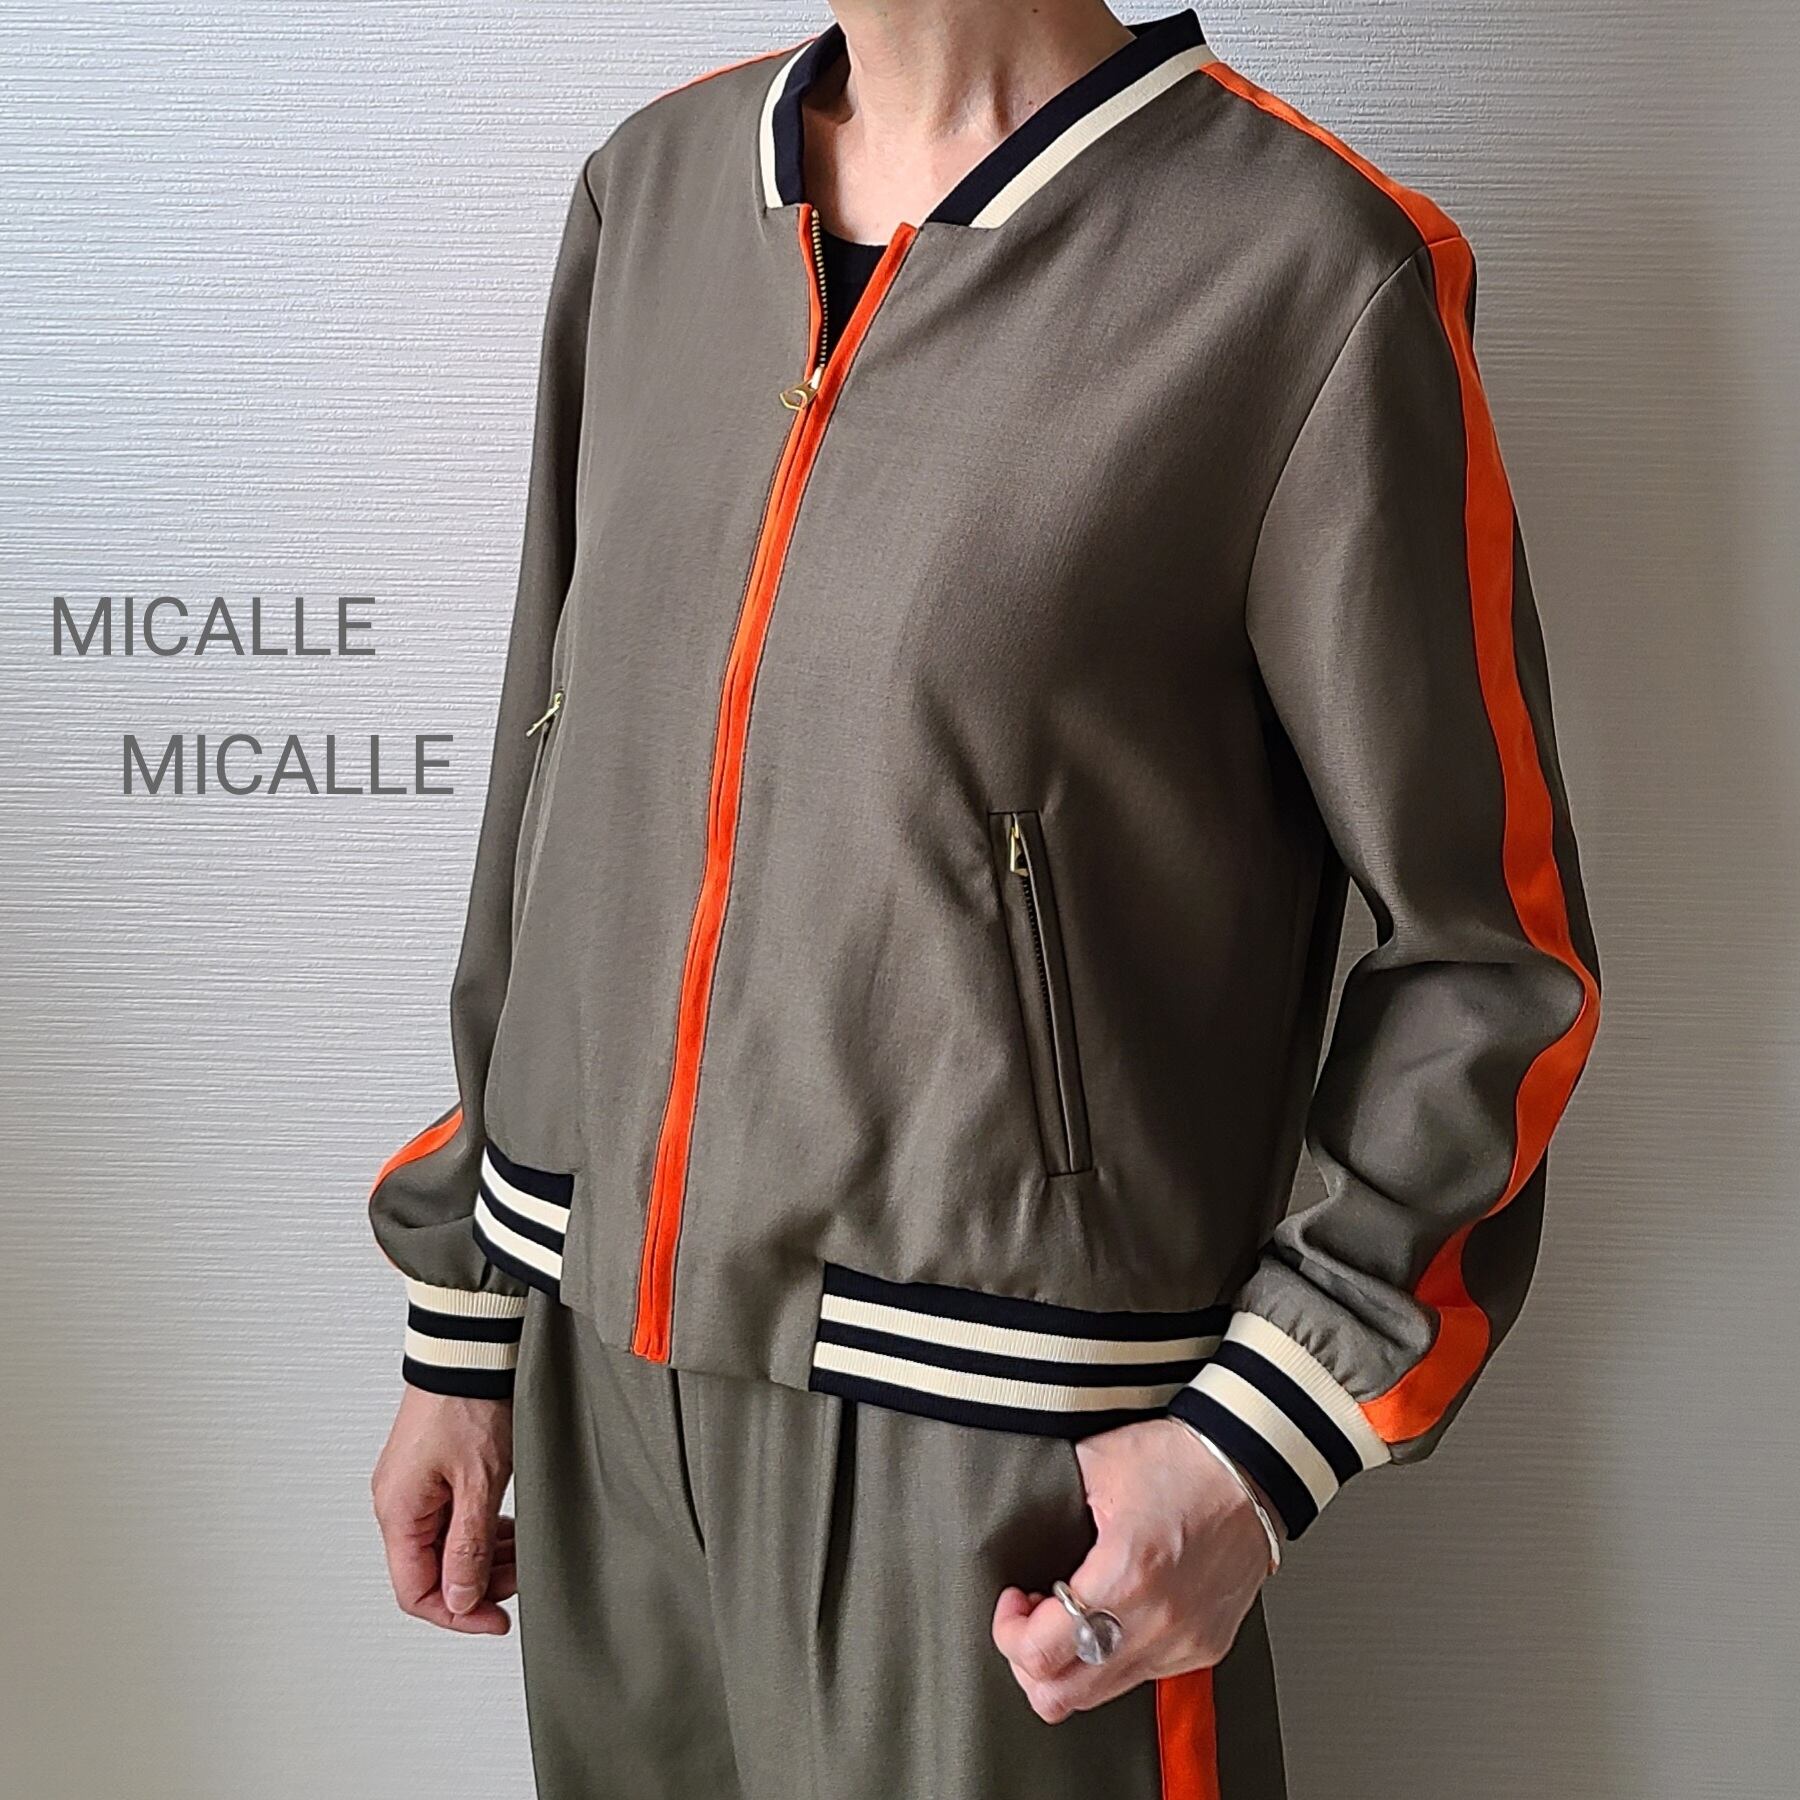 MICALLE MICALLE ボンディングカットソーパンツセットアップ